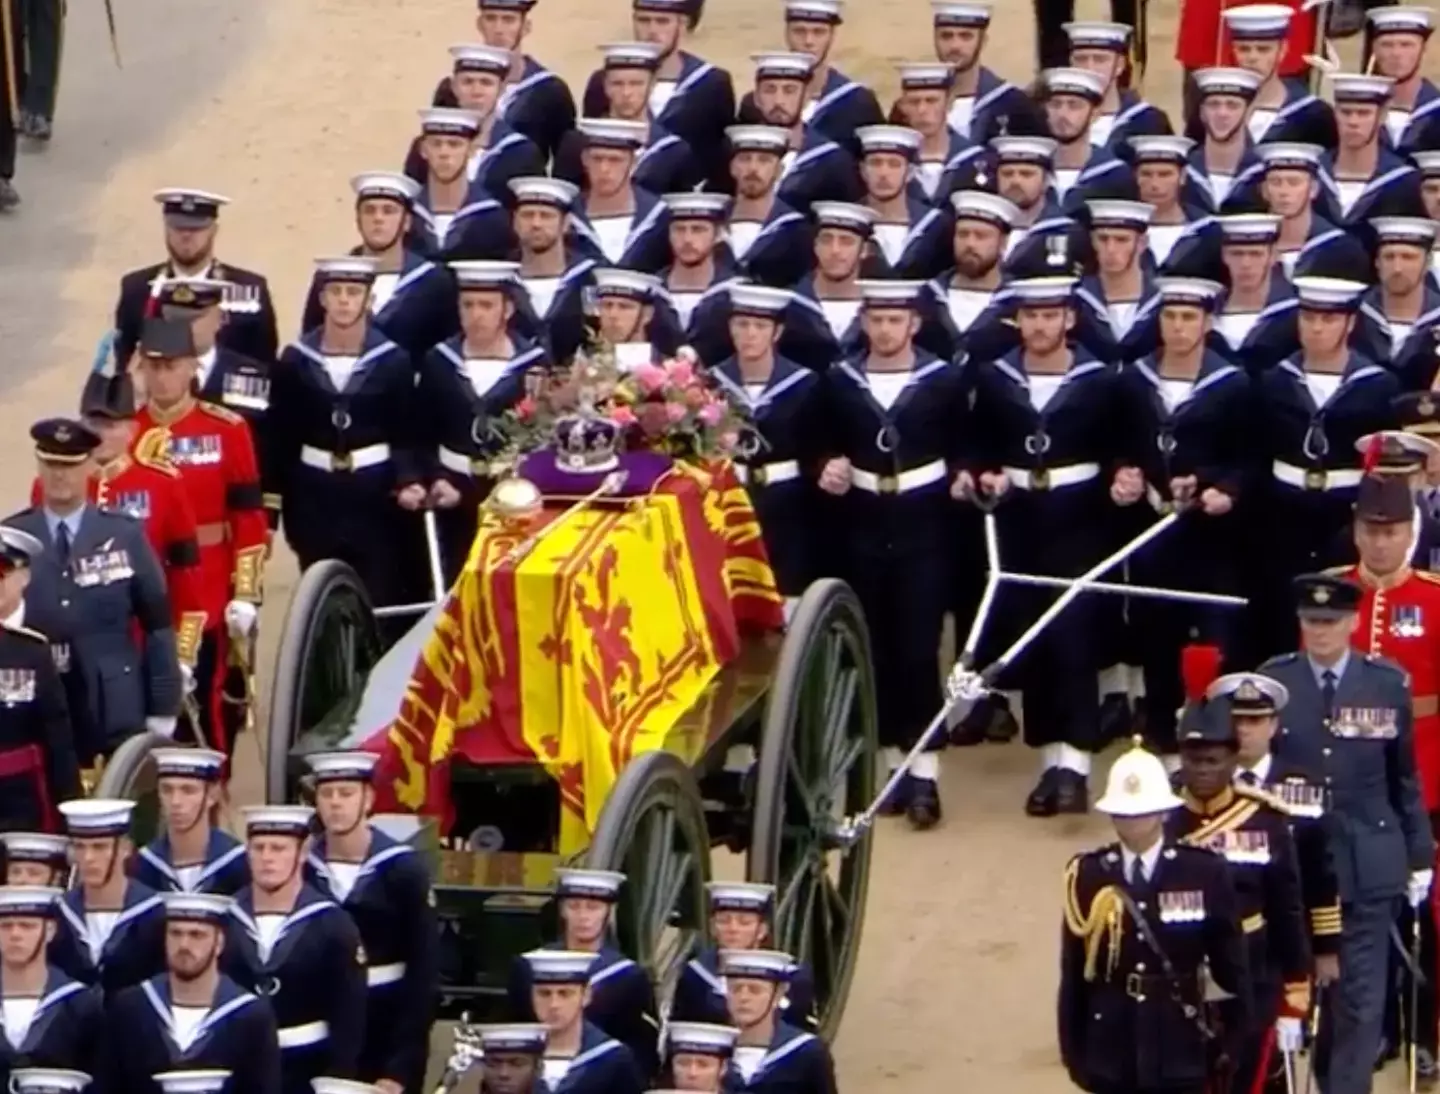 The Queen's coffin is accompanied by members of the Royal Navy.